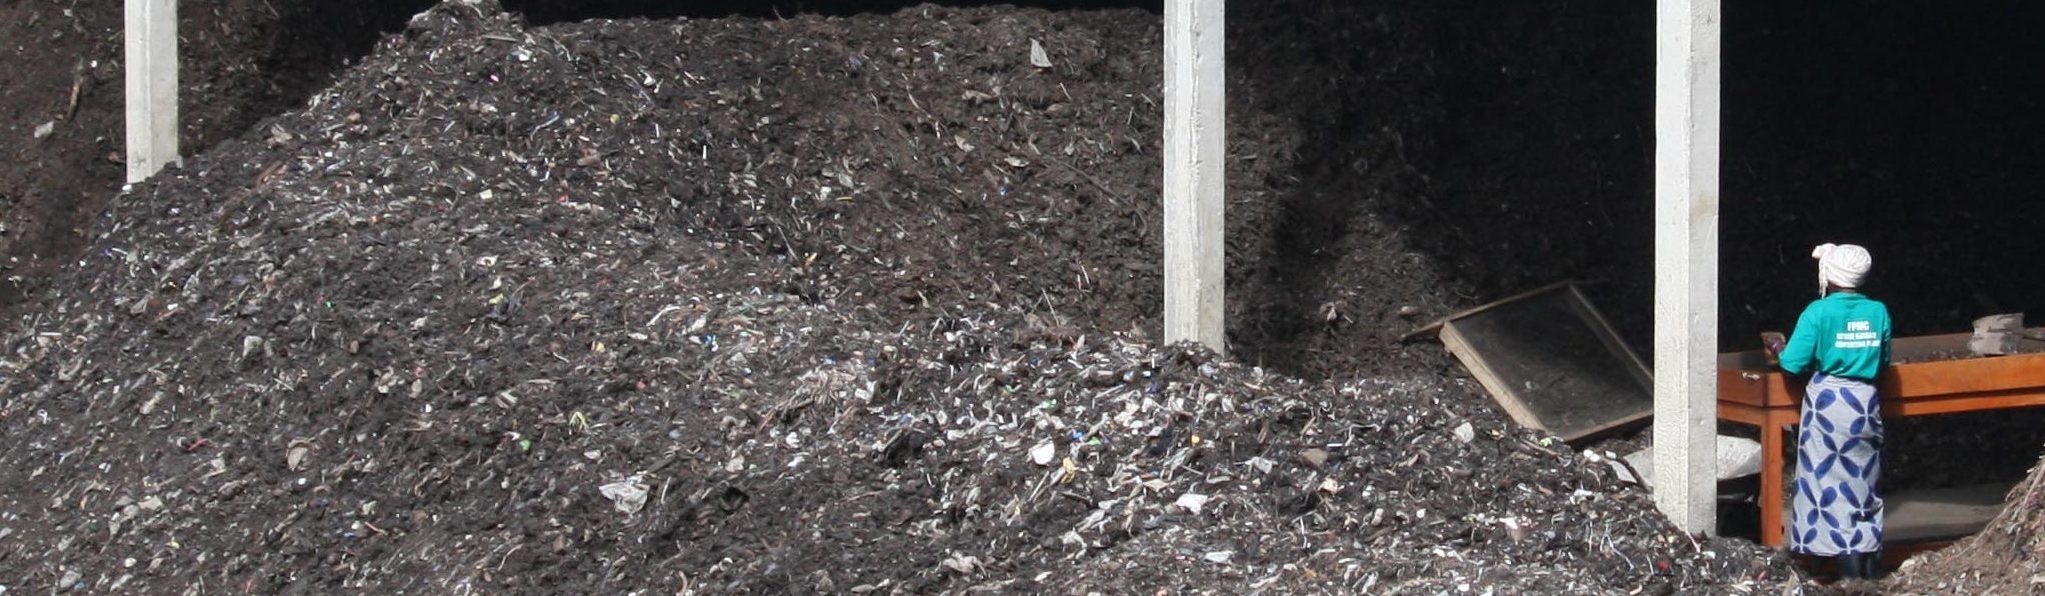 Urban Solid waste composting in Uganda, africa, climate change project.